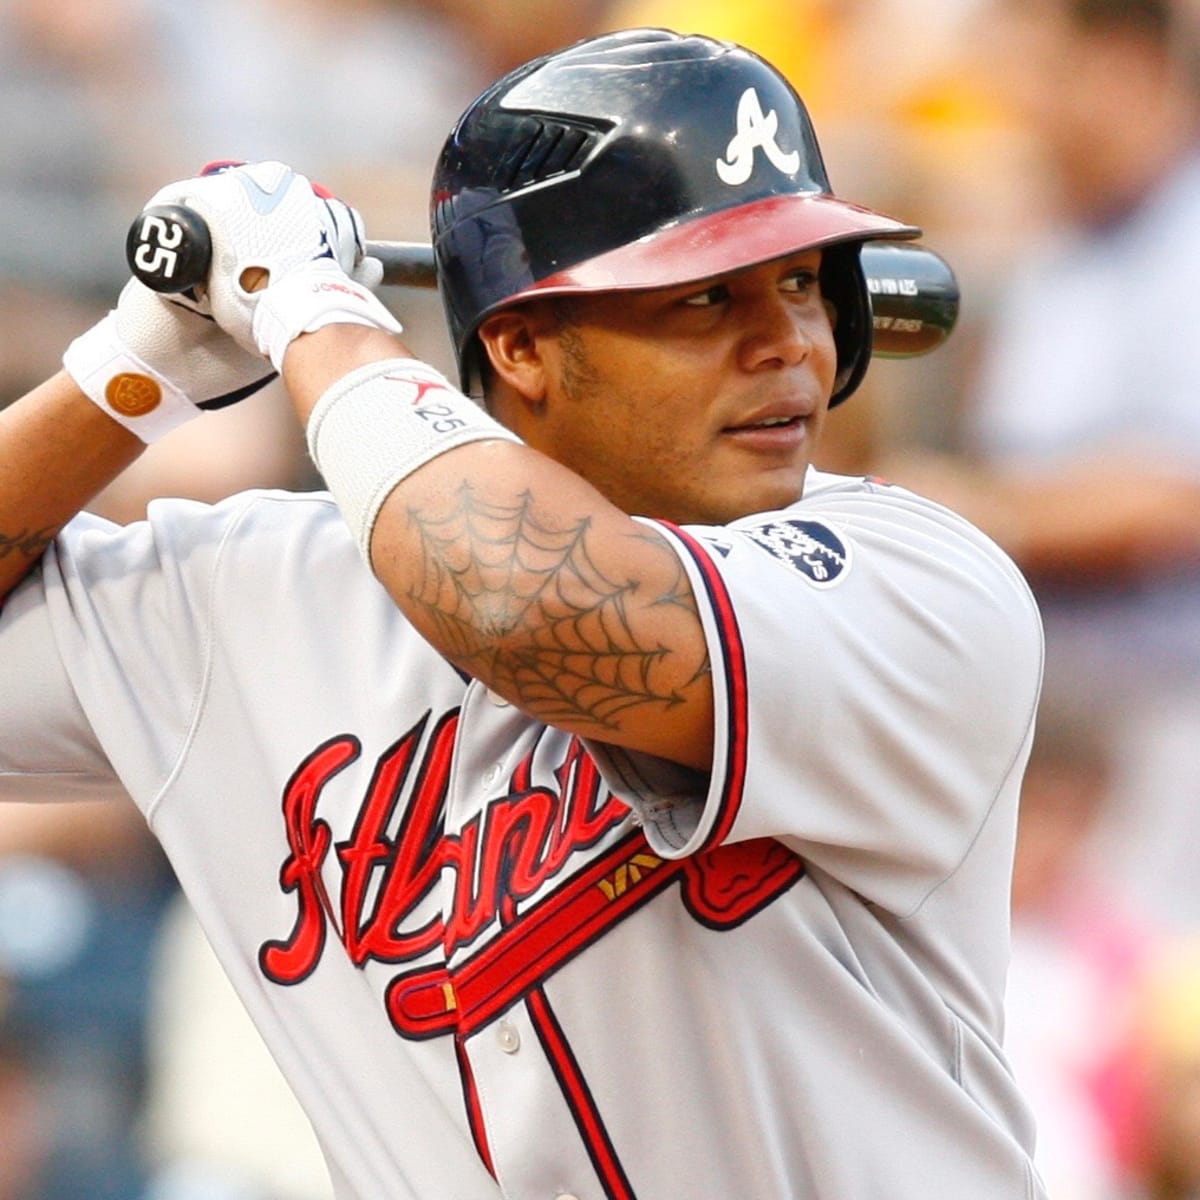 Andruw Jones likely won't reach the Hall of Fame - Sports Illustrated